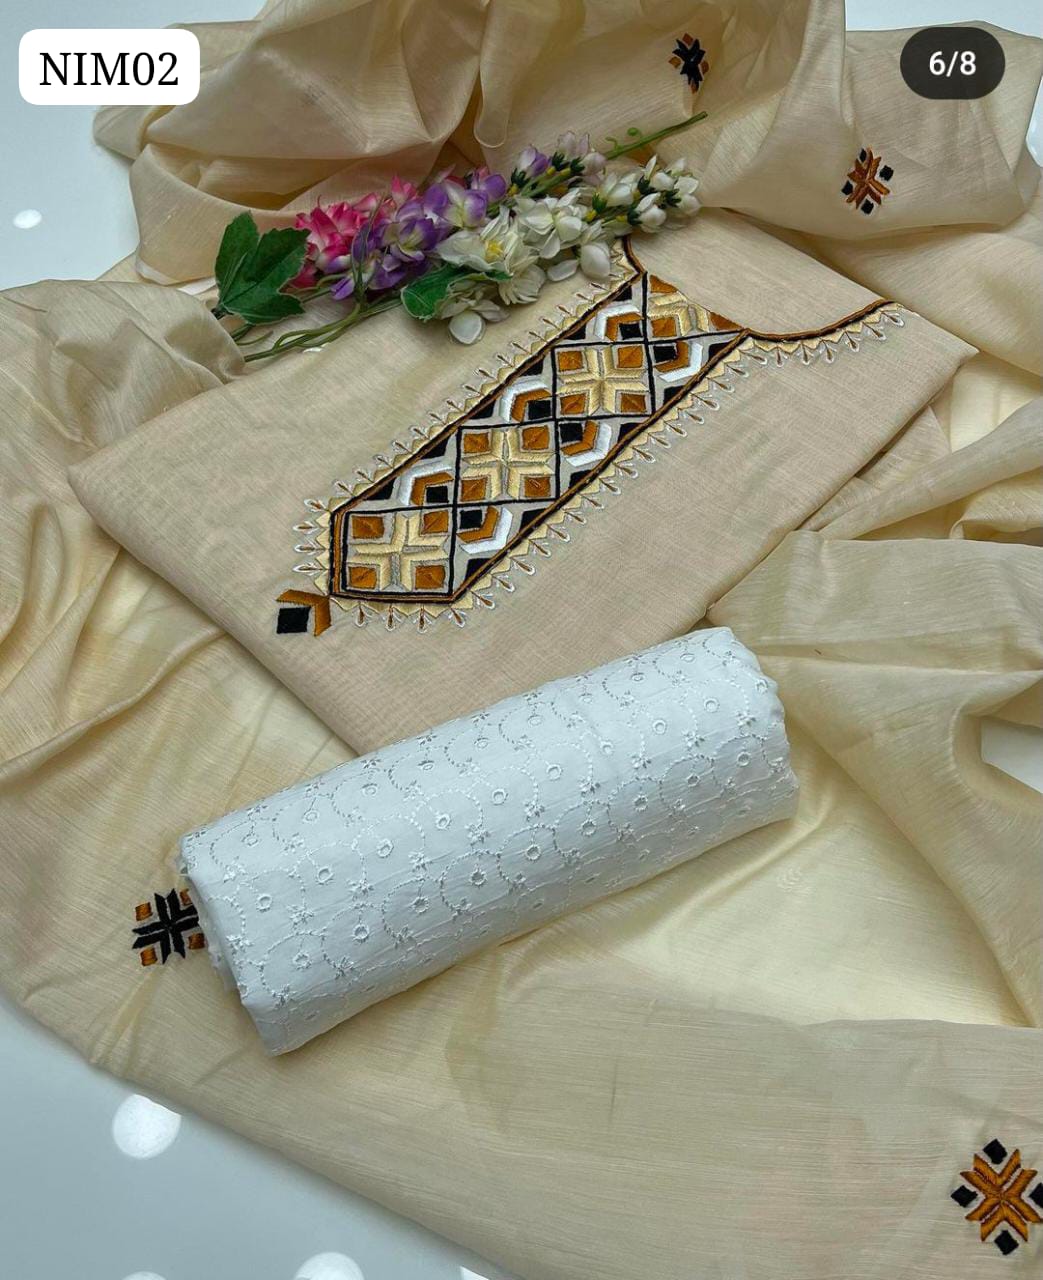 Paper Cotton Fabric Multi Embroidery Work Shirt With Paper Cotton Embroidery Dupatta And Lawn Chicken Trouser 3Pc Dress